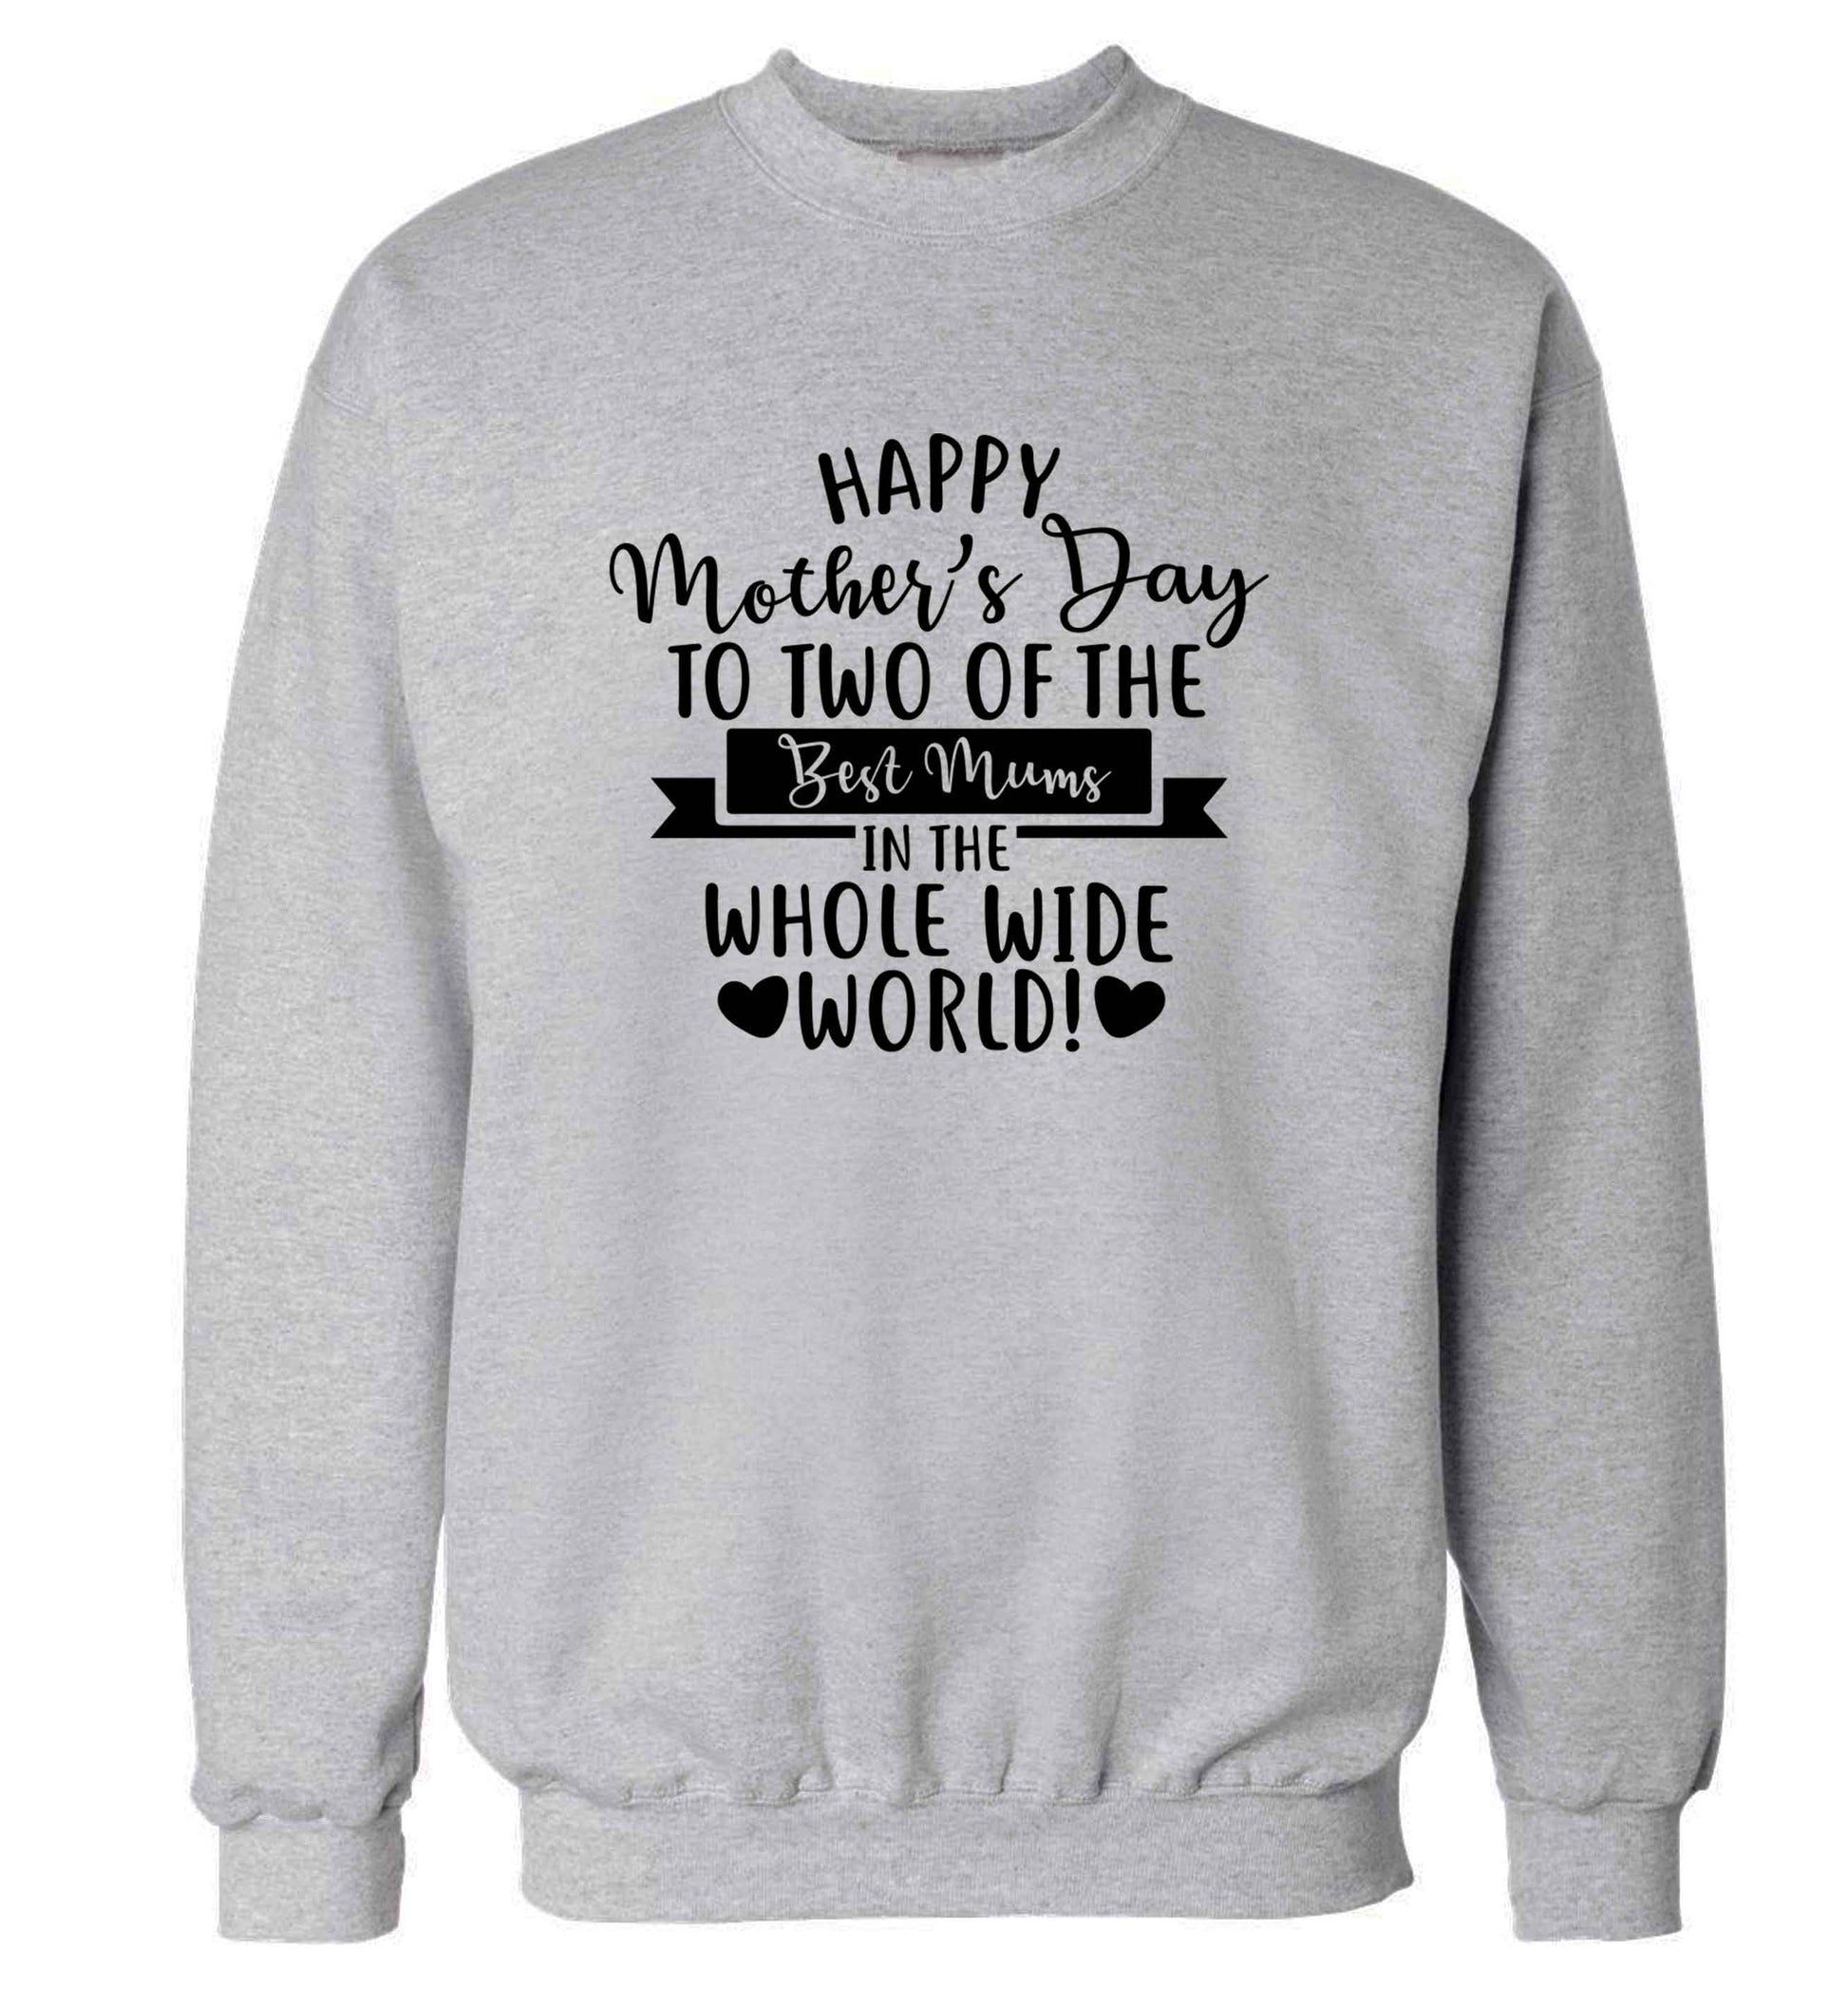 Happy mother's day to two of the best mums in the whole wide world adult's unisex grey sweater 2XL